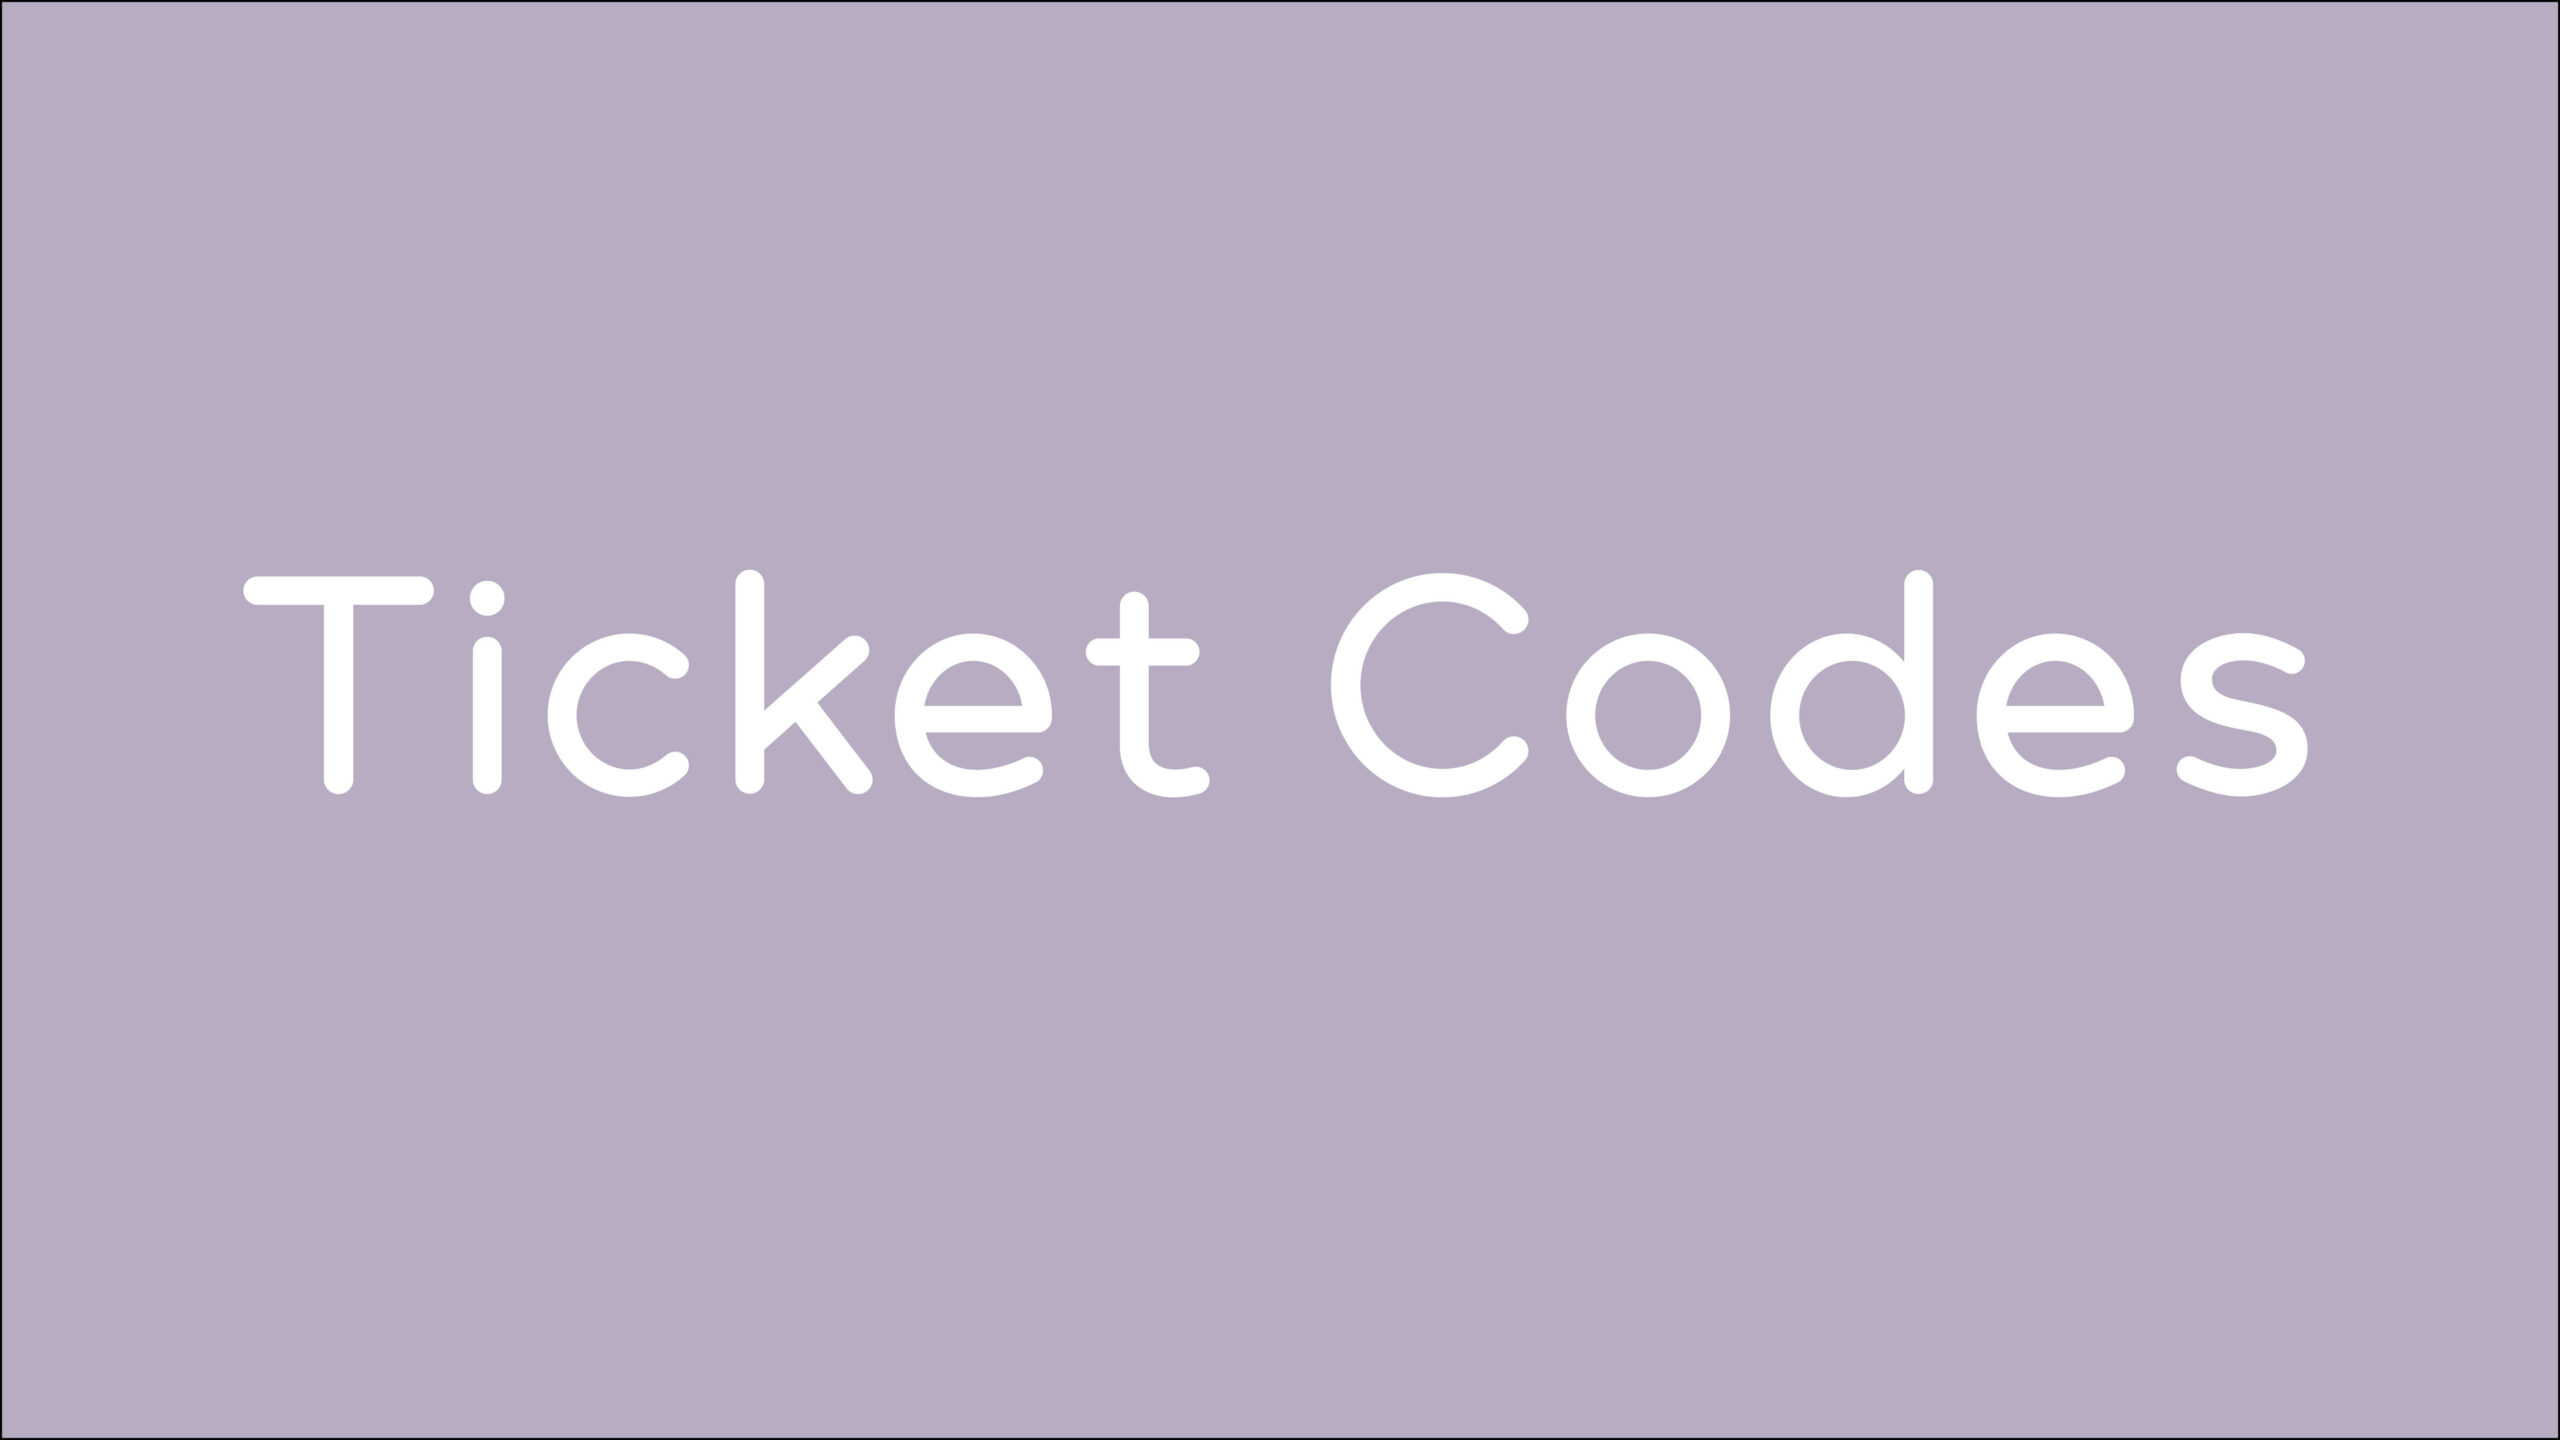 Ticket Codes Welcome Kit Graphic